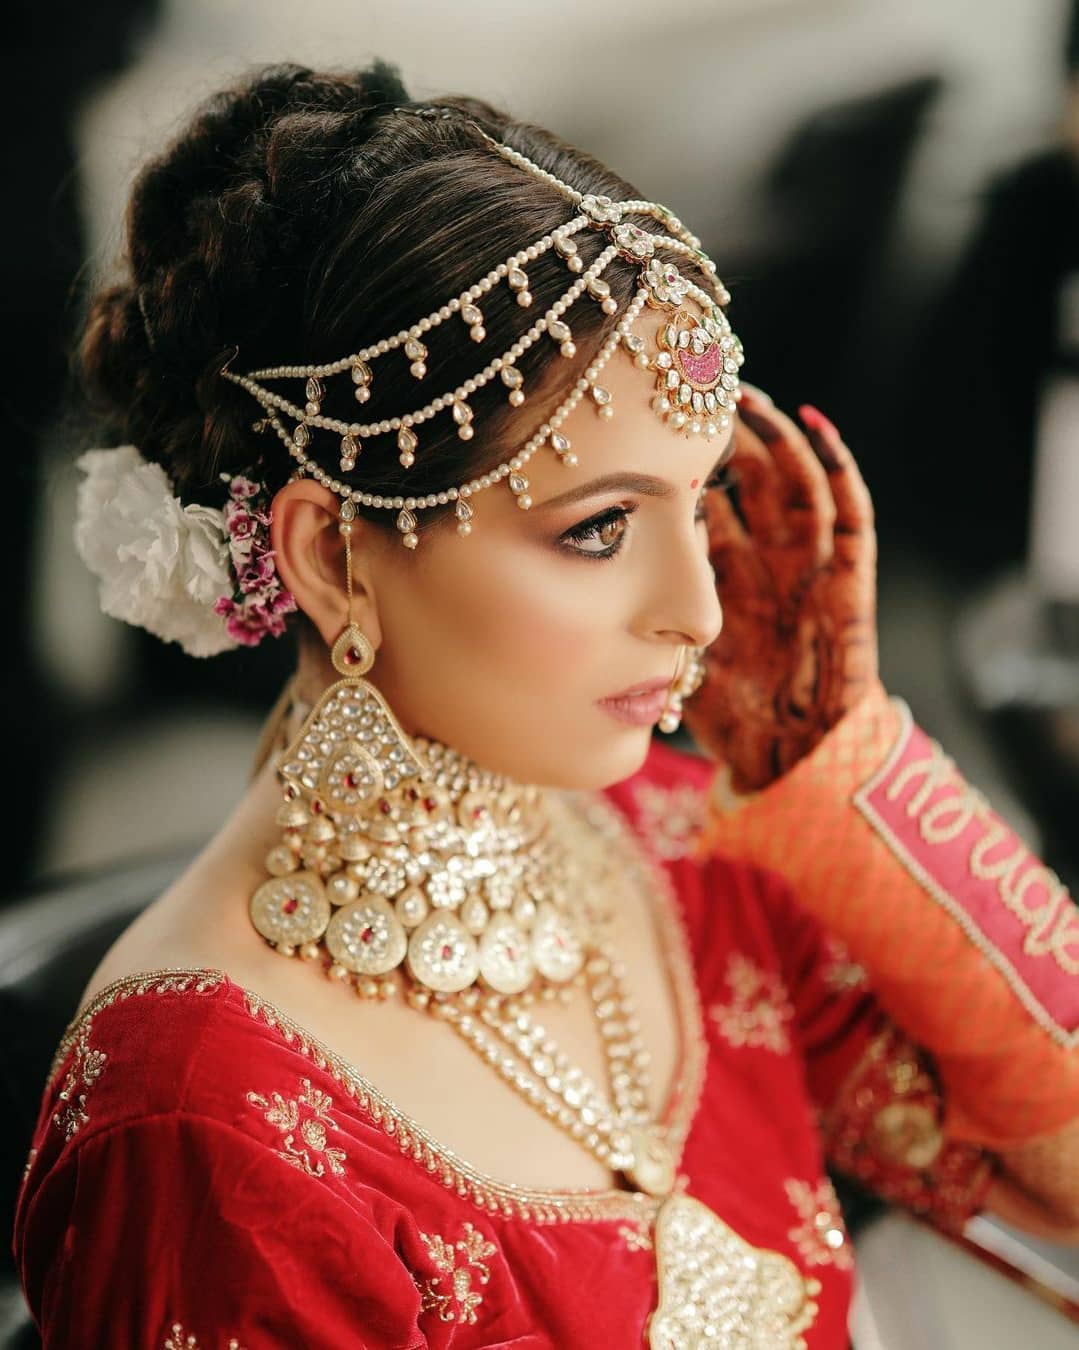 51 Bridal Matha Patti Designs To Complement Every Bridal Style - Wedbook-hkpdtq2012.edu.vn